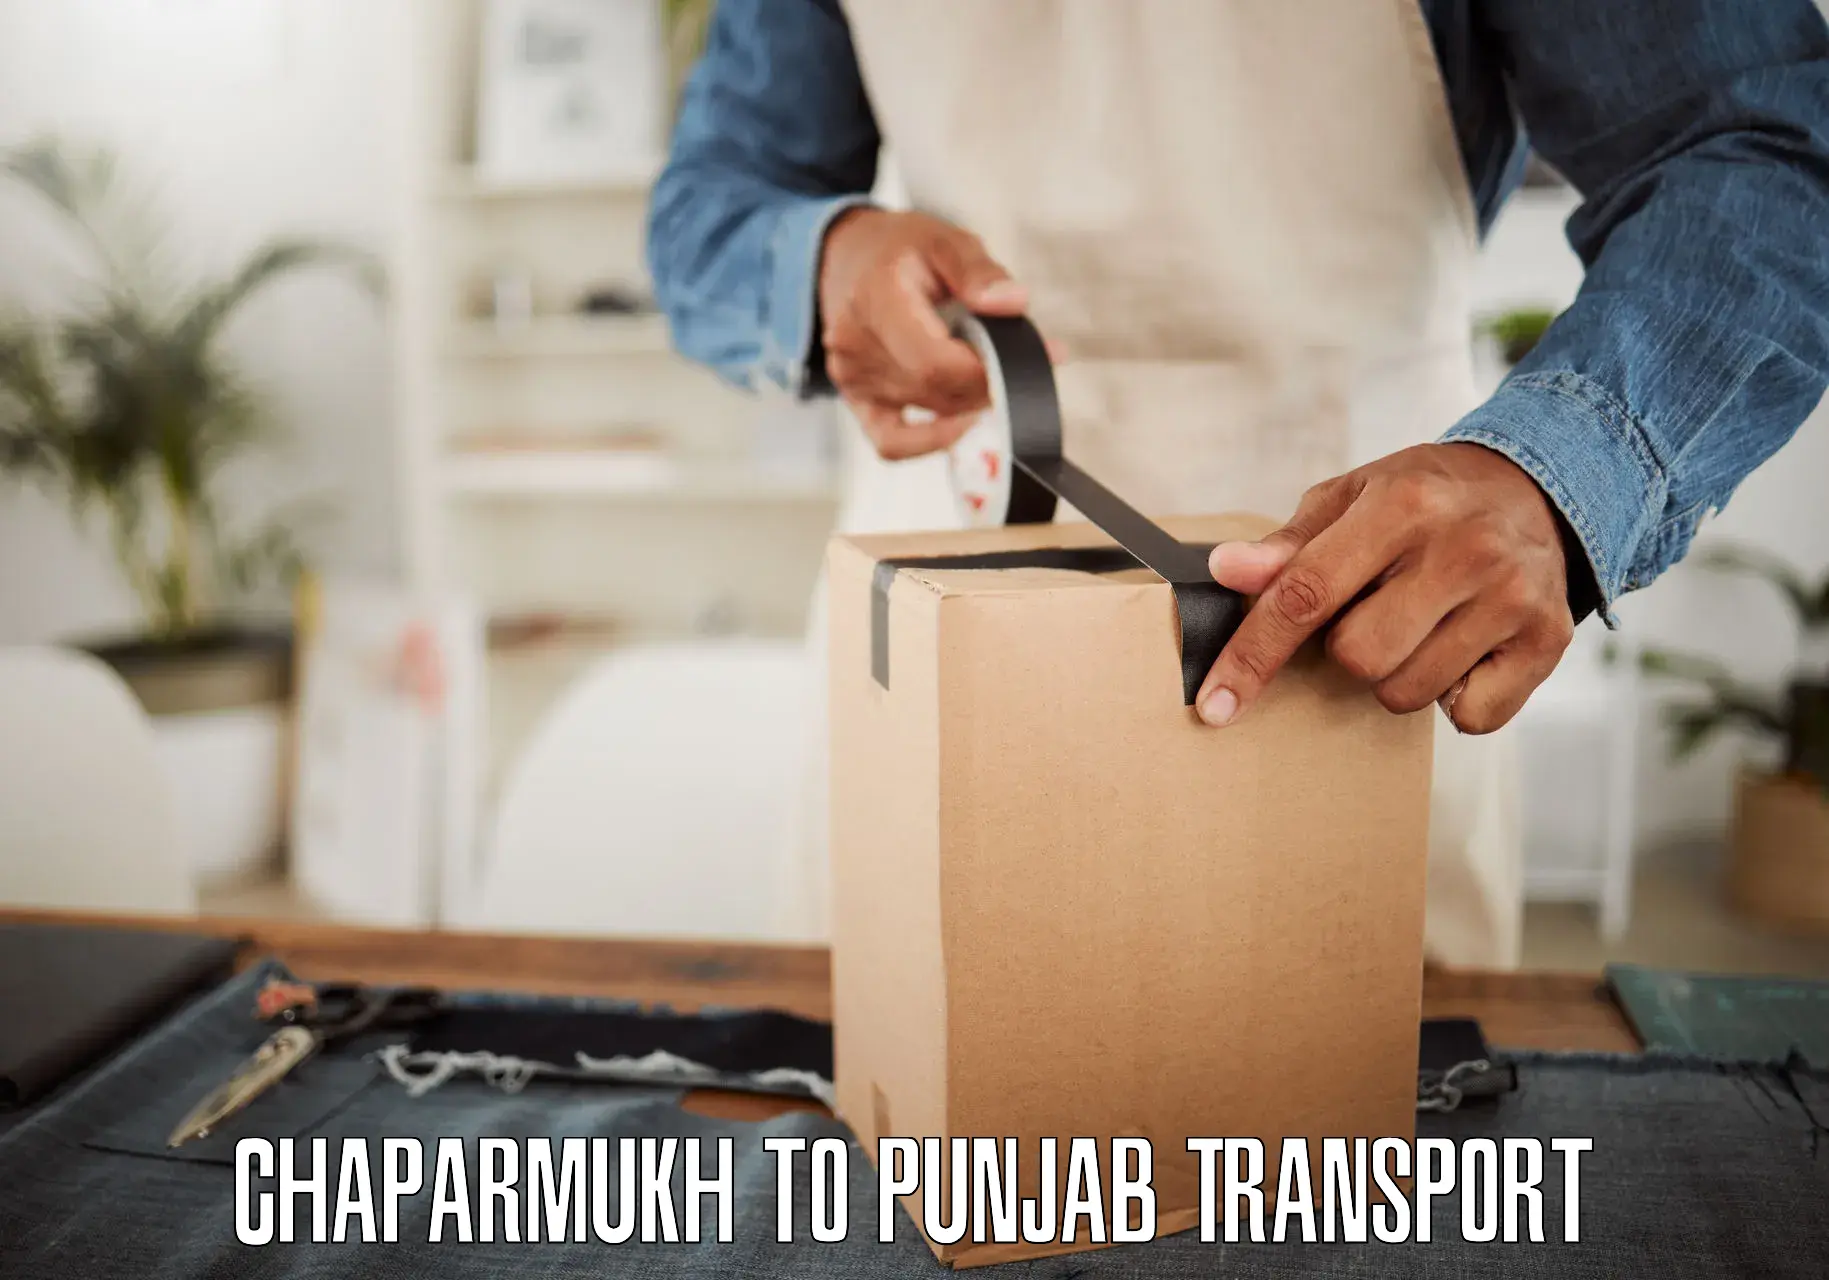 Two wheeler transport services Chaparmukh to Firozpur